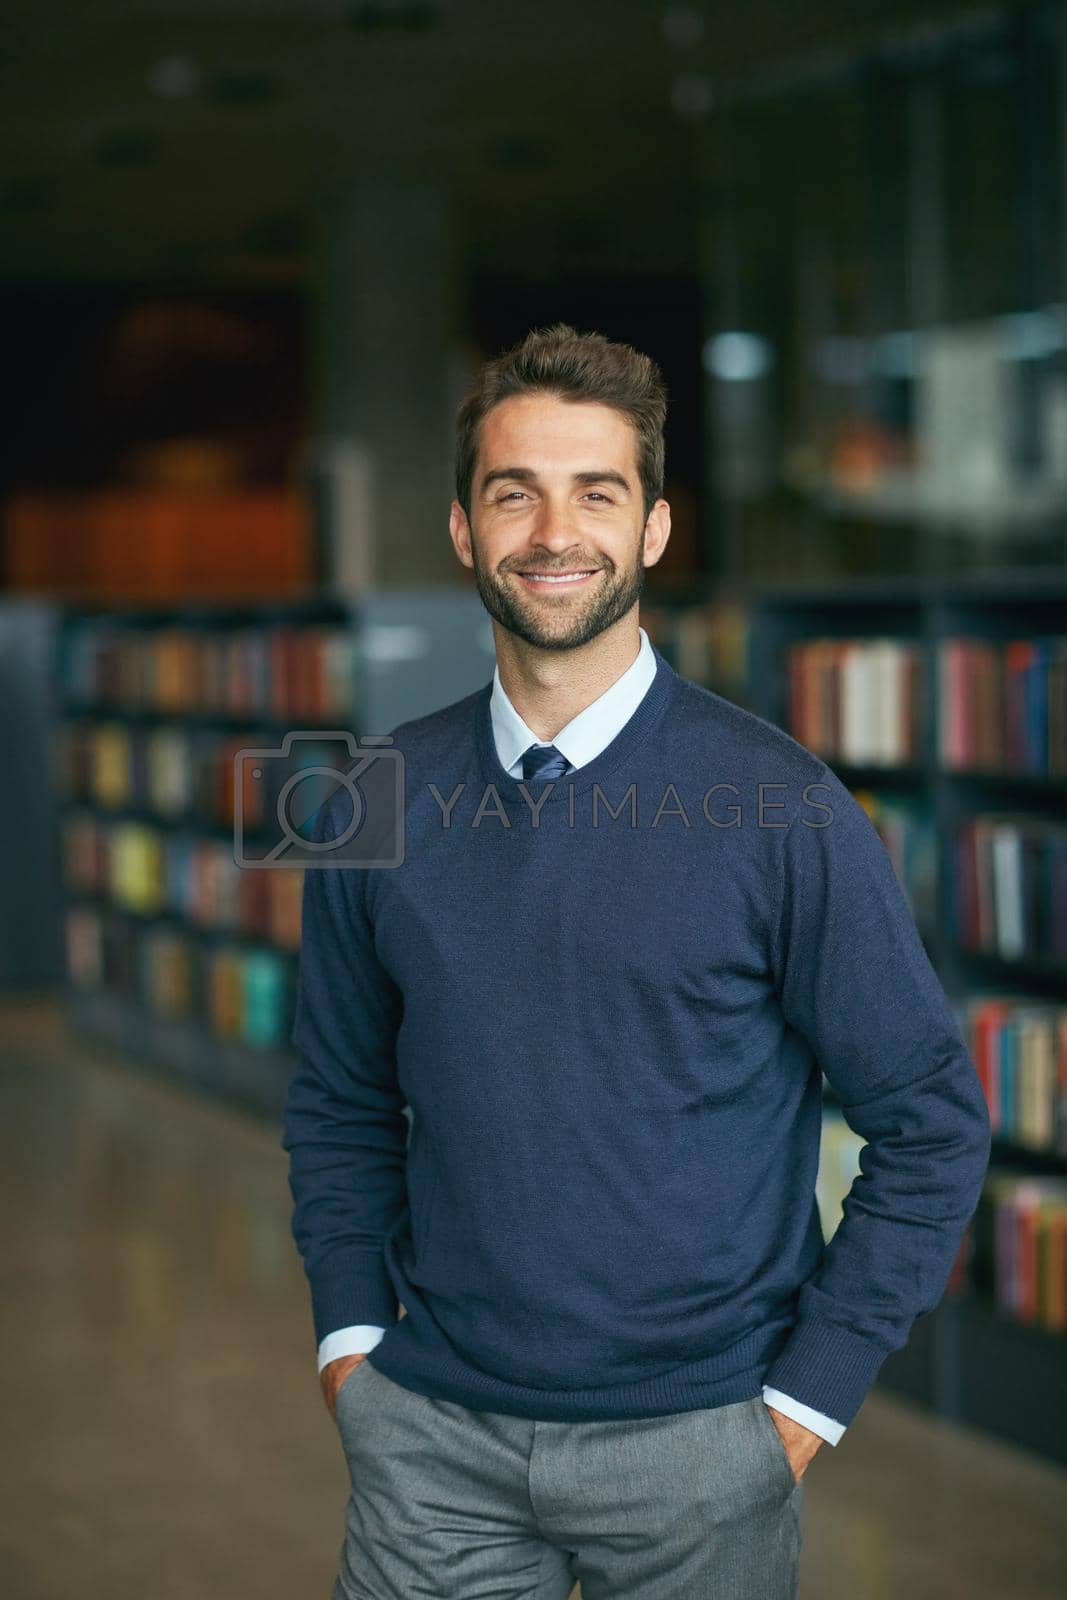 Royalty free image of I work best in libraries. Cropped portrait of a handsome young businessman standing with his hands in his pockets in an empty library. by YuriArcurs